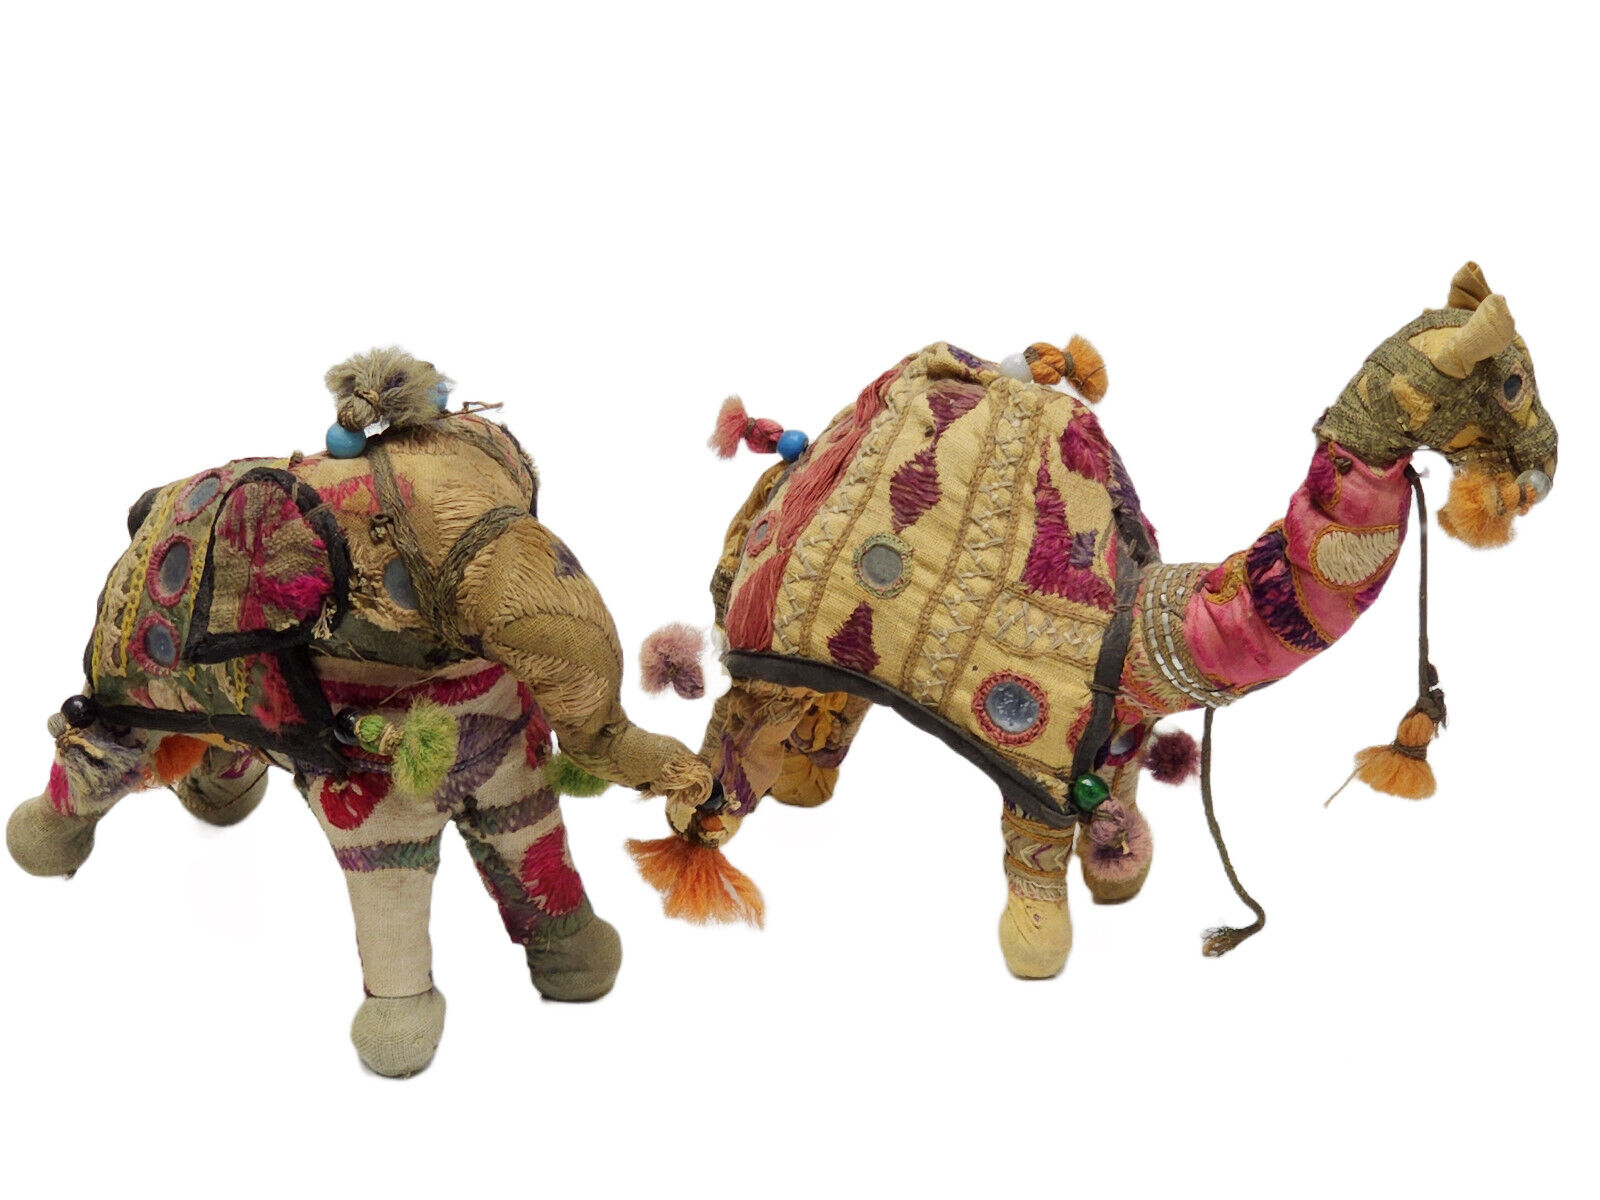 HANDCRAFTED RAJASTHAN EMBROIDERED FABRIC COVERED  STUFFED CAMEL and ELEPHANT TOY